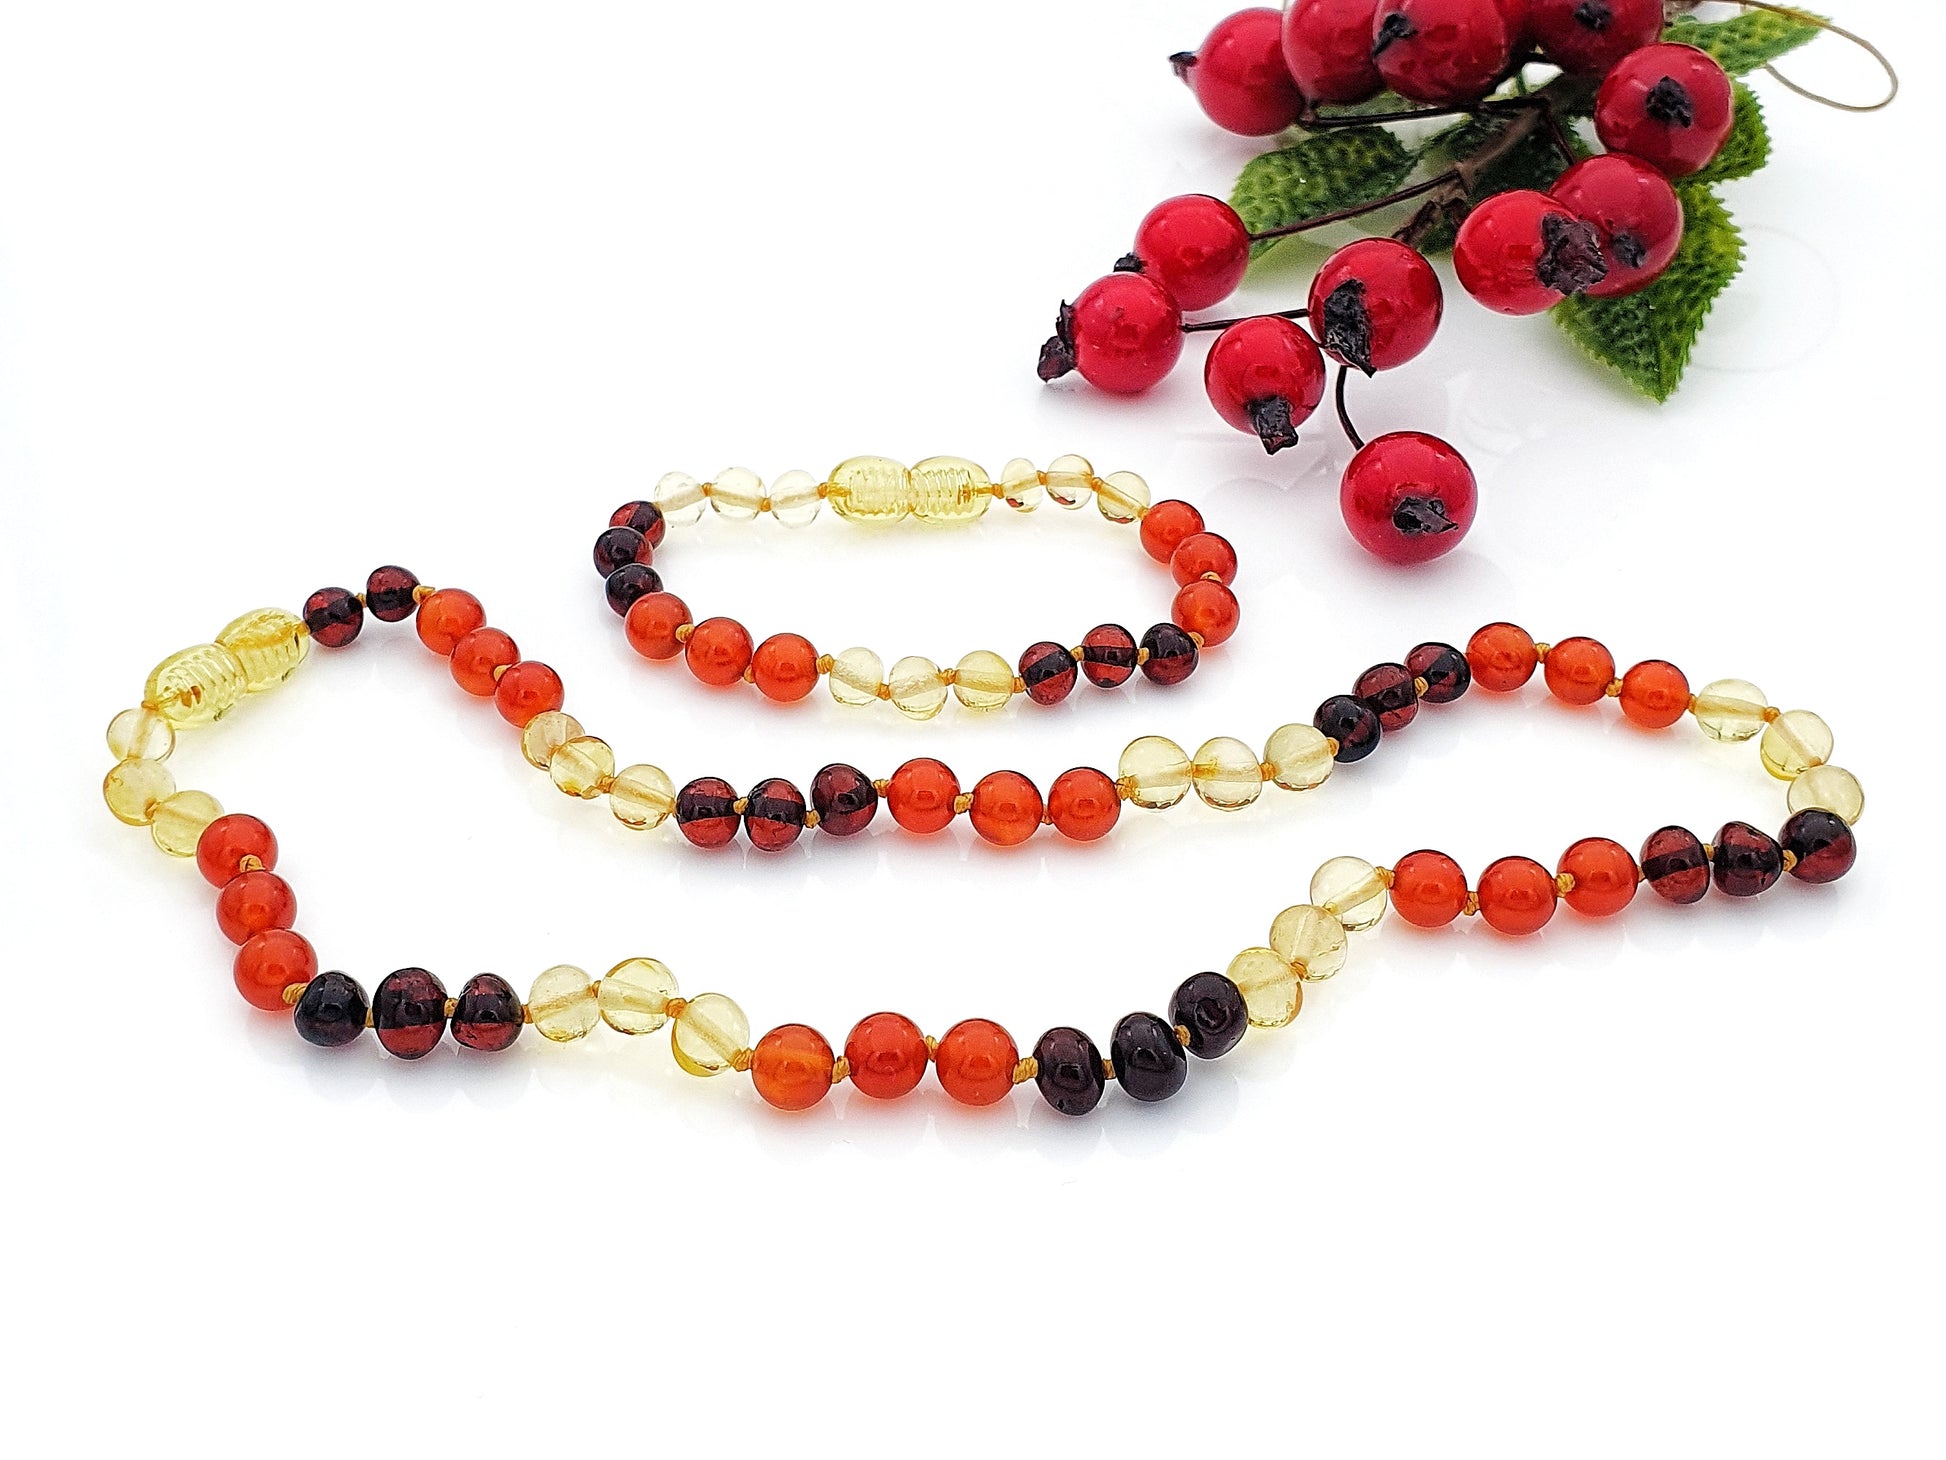 Amber baby teething necklace and bracelet